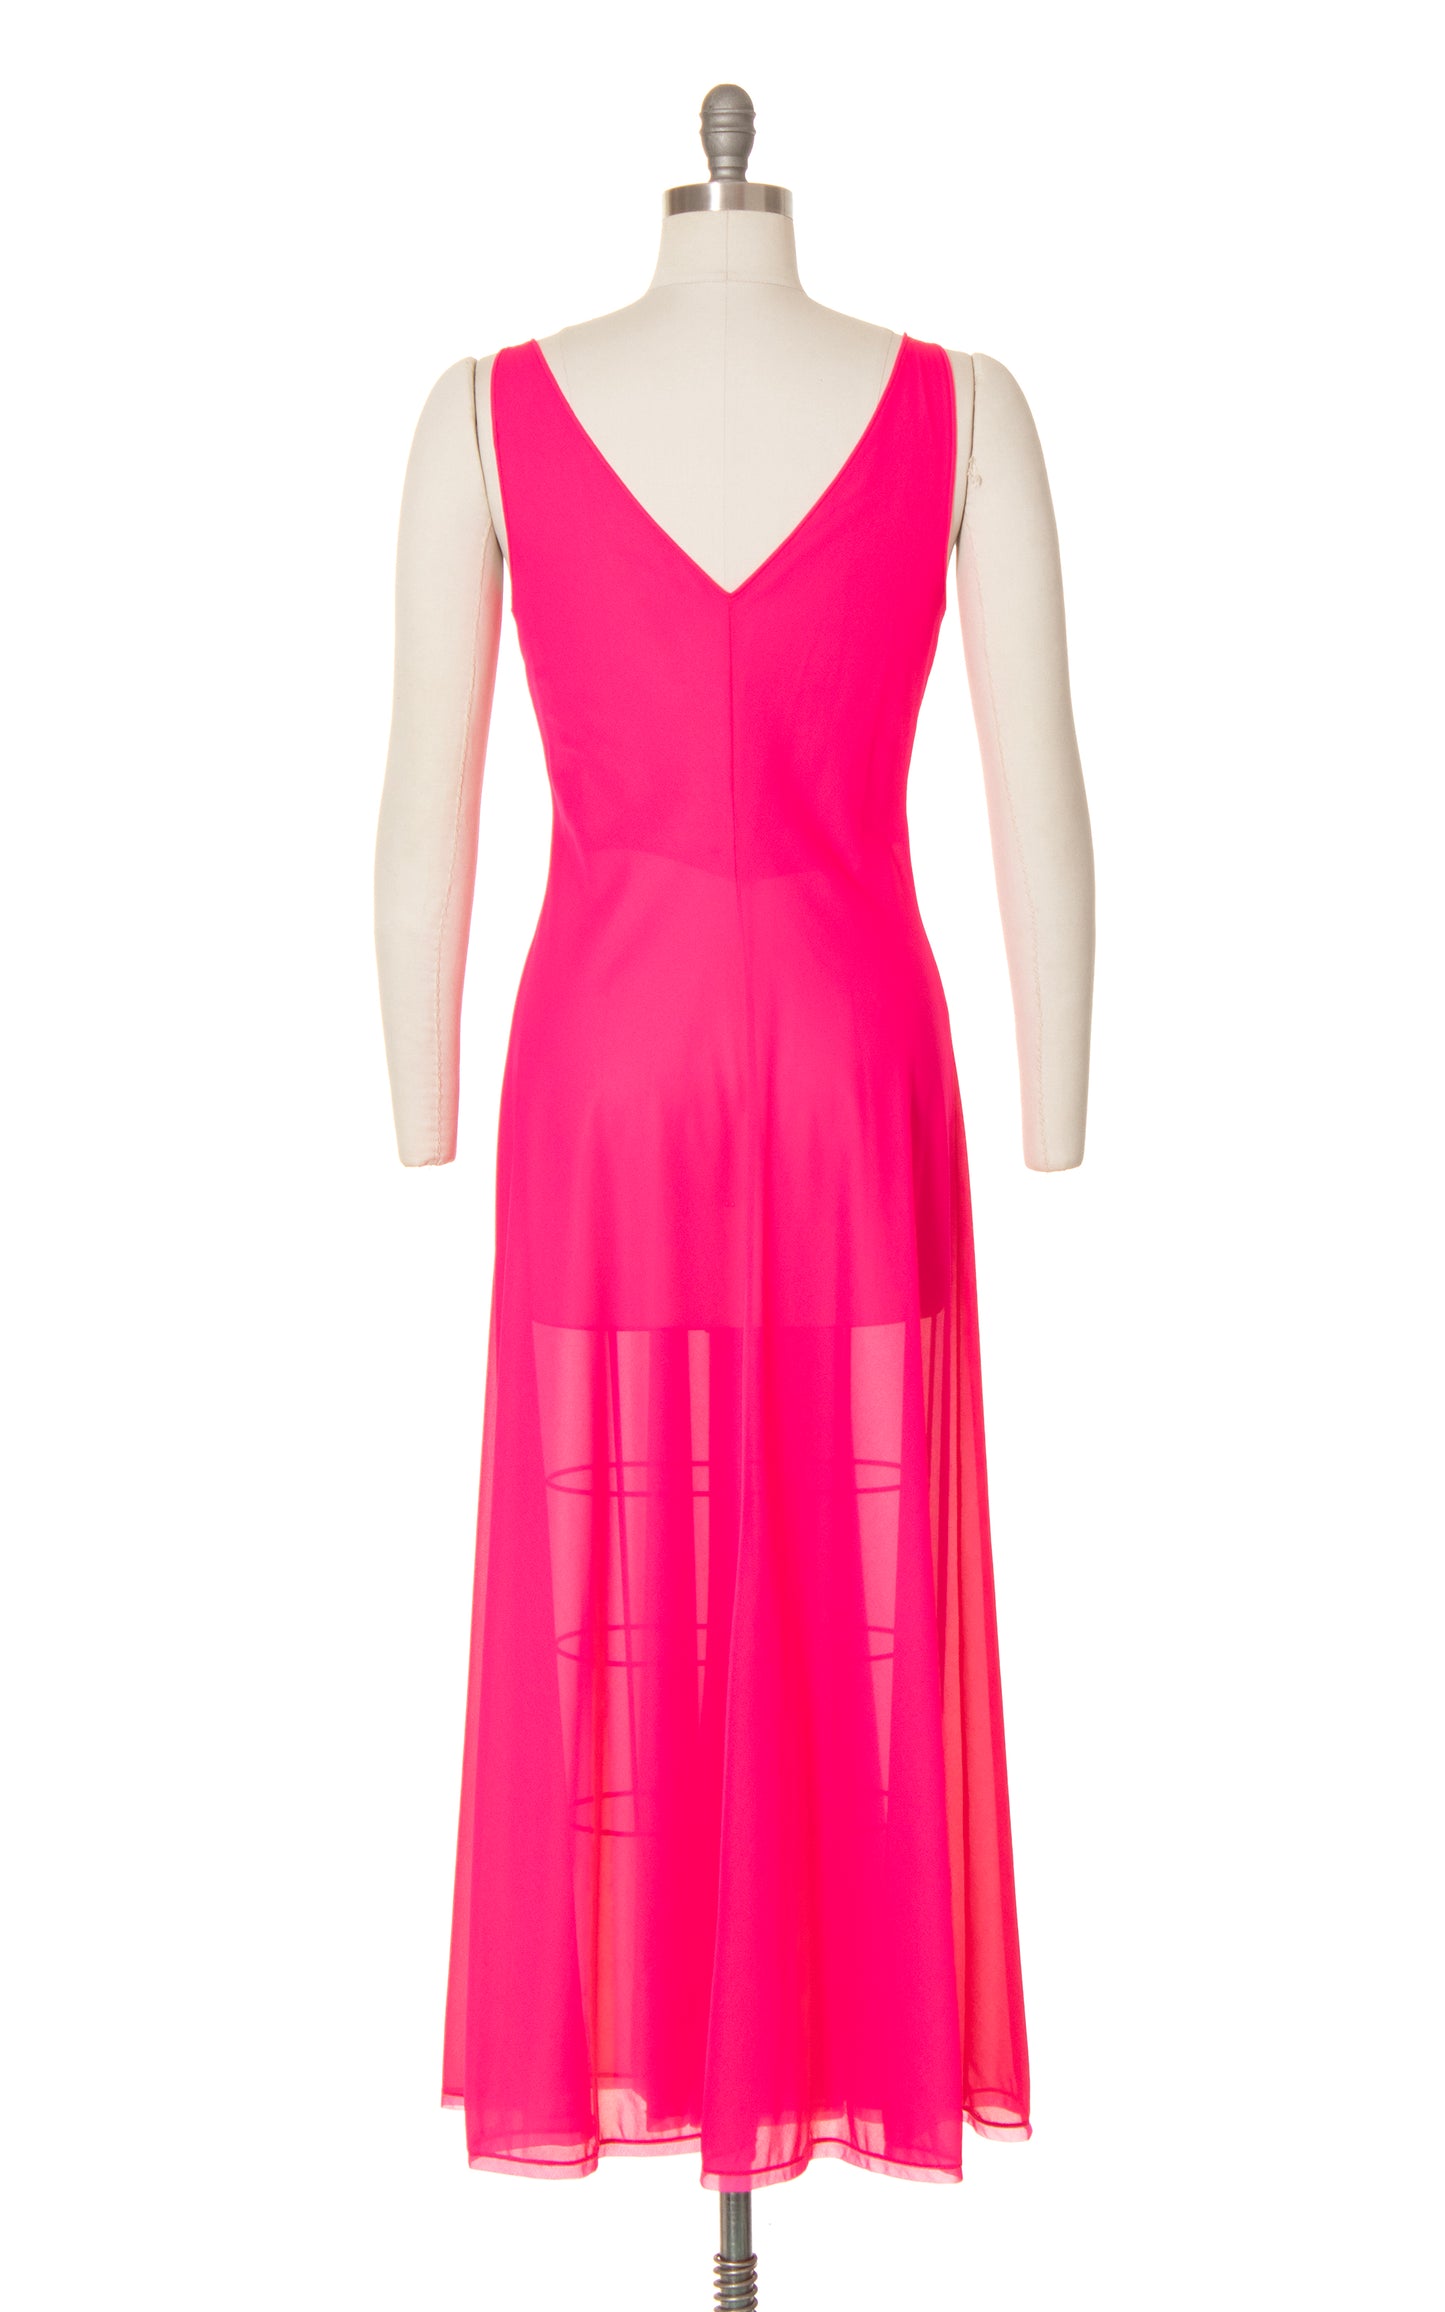 1970s Neon Hot Pink Nightgown | small/medium/large